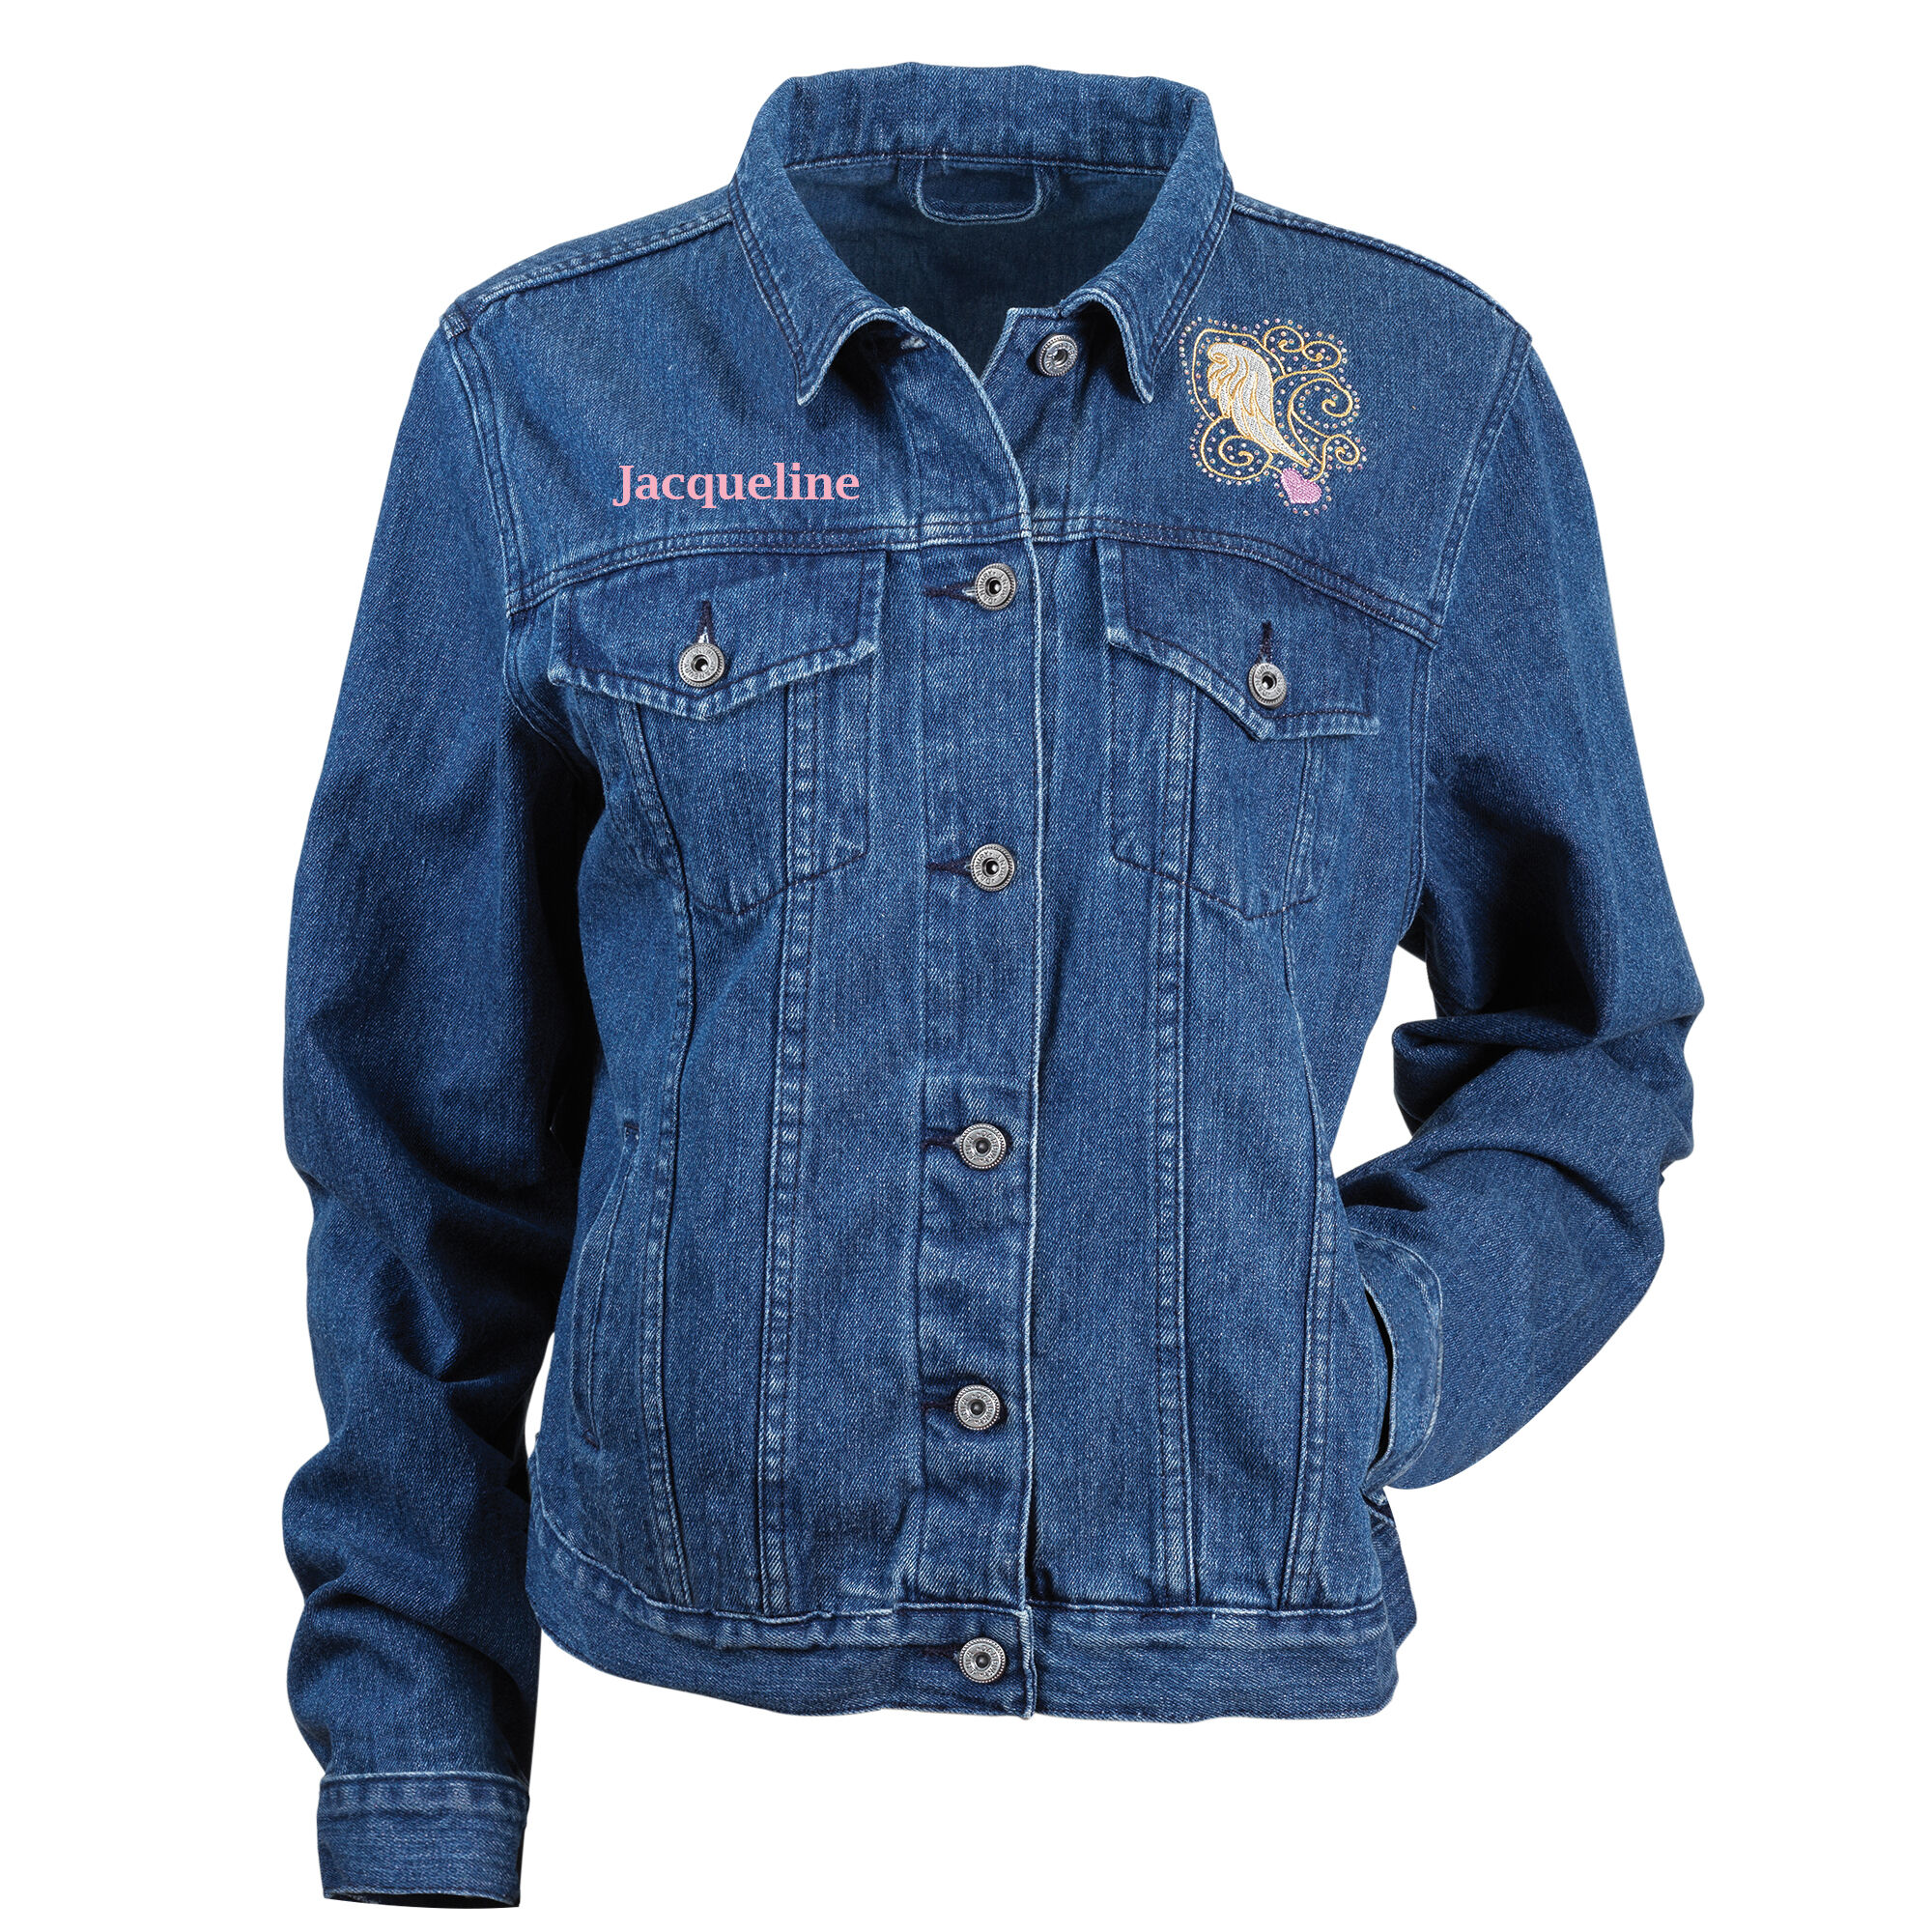 Touched by an Angel Denim Jacket 6681 0011 a main